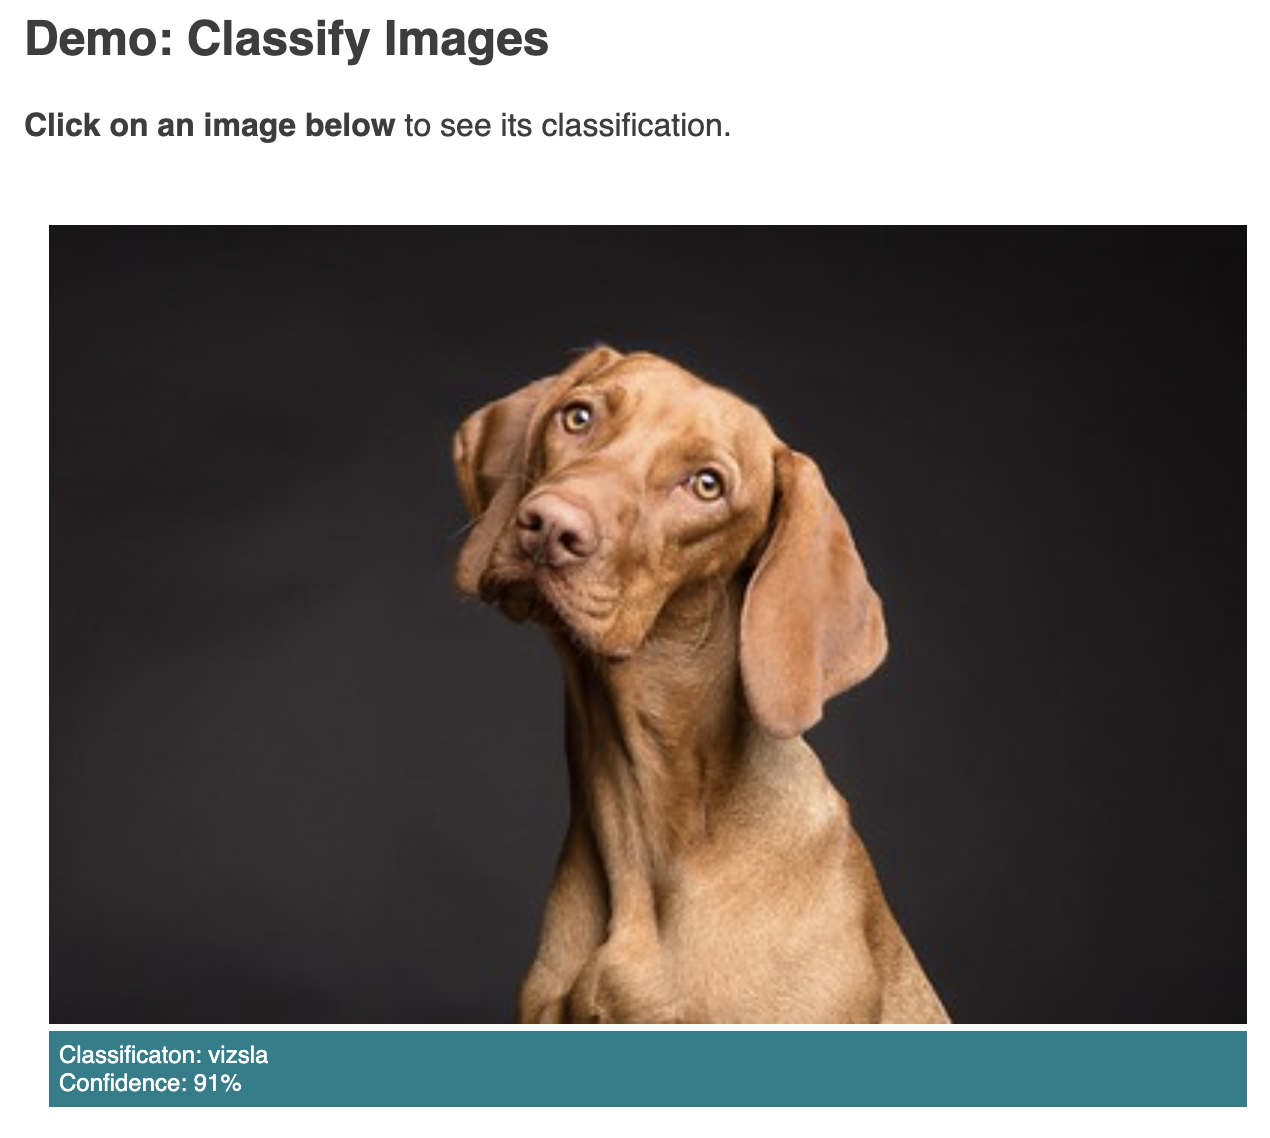 Cropped Screen grab of Mediapipe Image Classifier for web Codepen demo showing the image of a dog under text which reads Demo: Classify images Click in an image below to see its classification